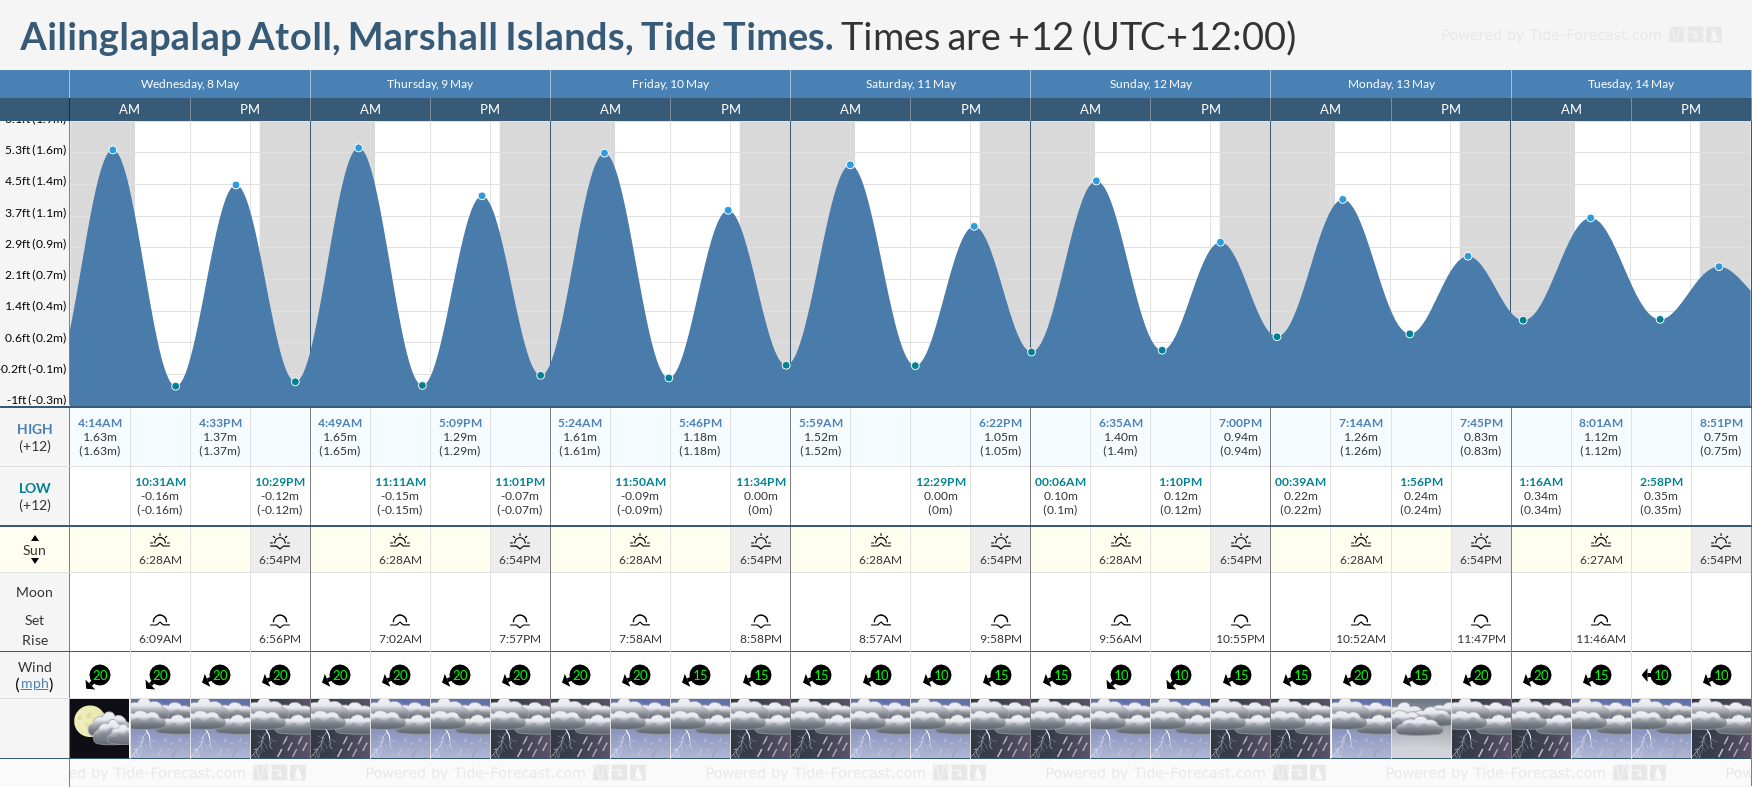 Ailinglapalap Atoll, Marshall Islands Tide Chart including high and low tide tide times for the next 7 days